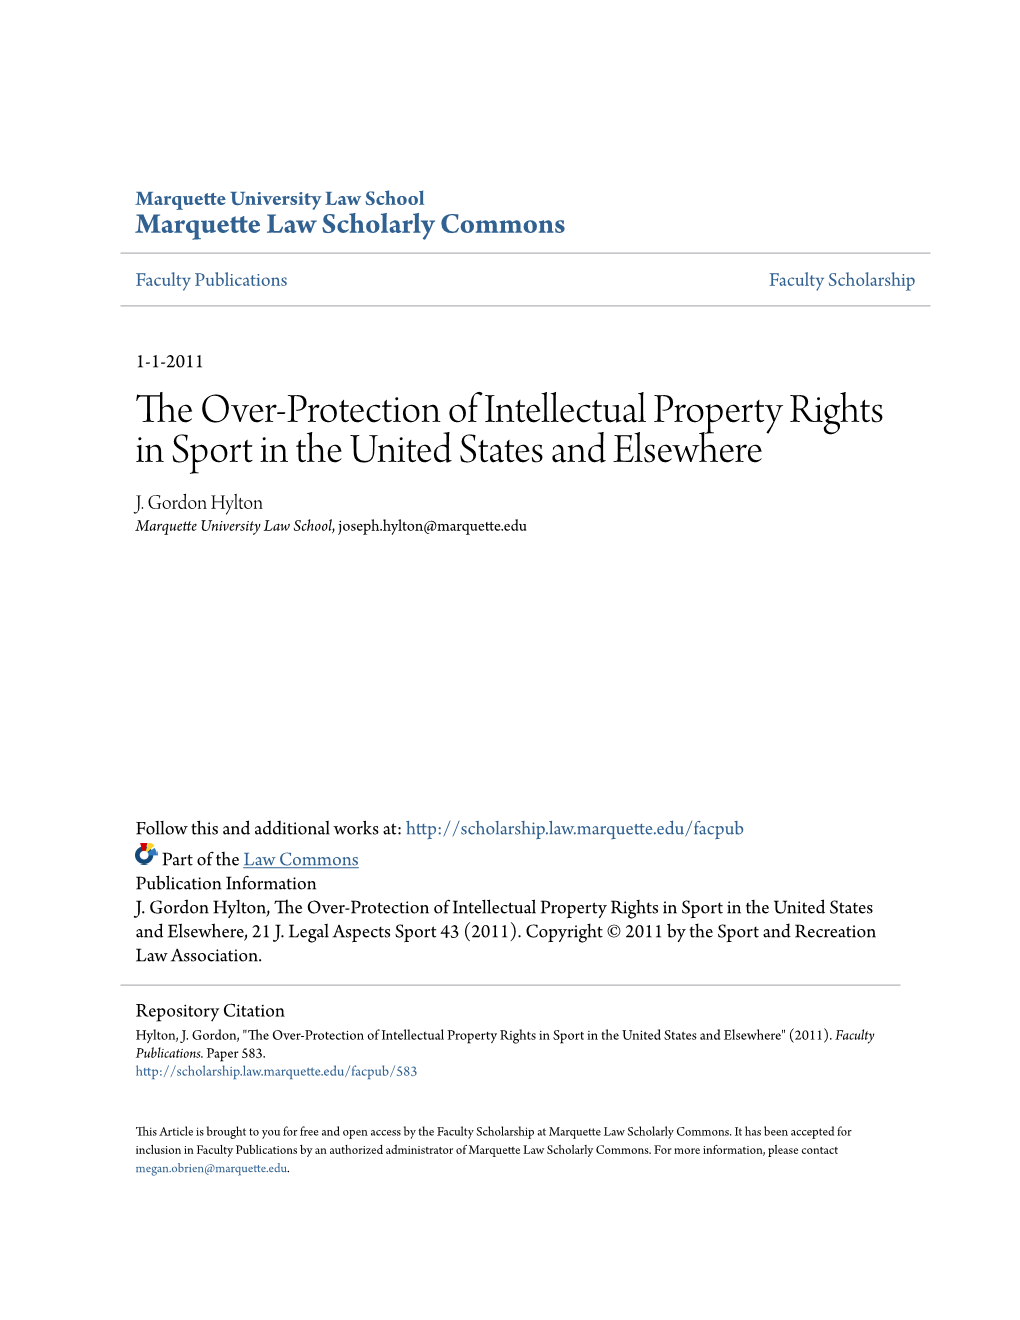 The Over-Protection of Intellectual Property Rights in Sport in the United States and Elsewhere J